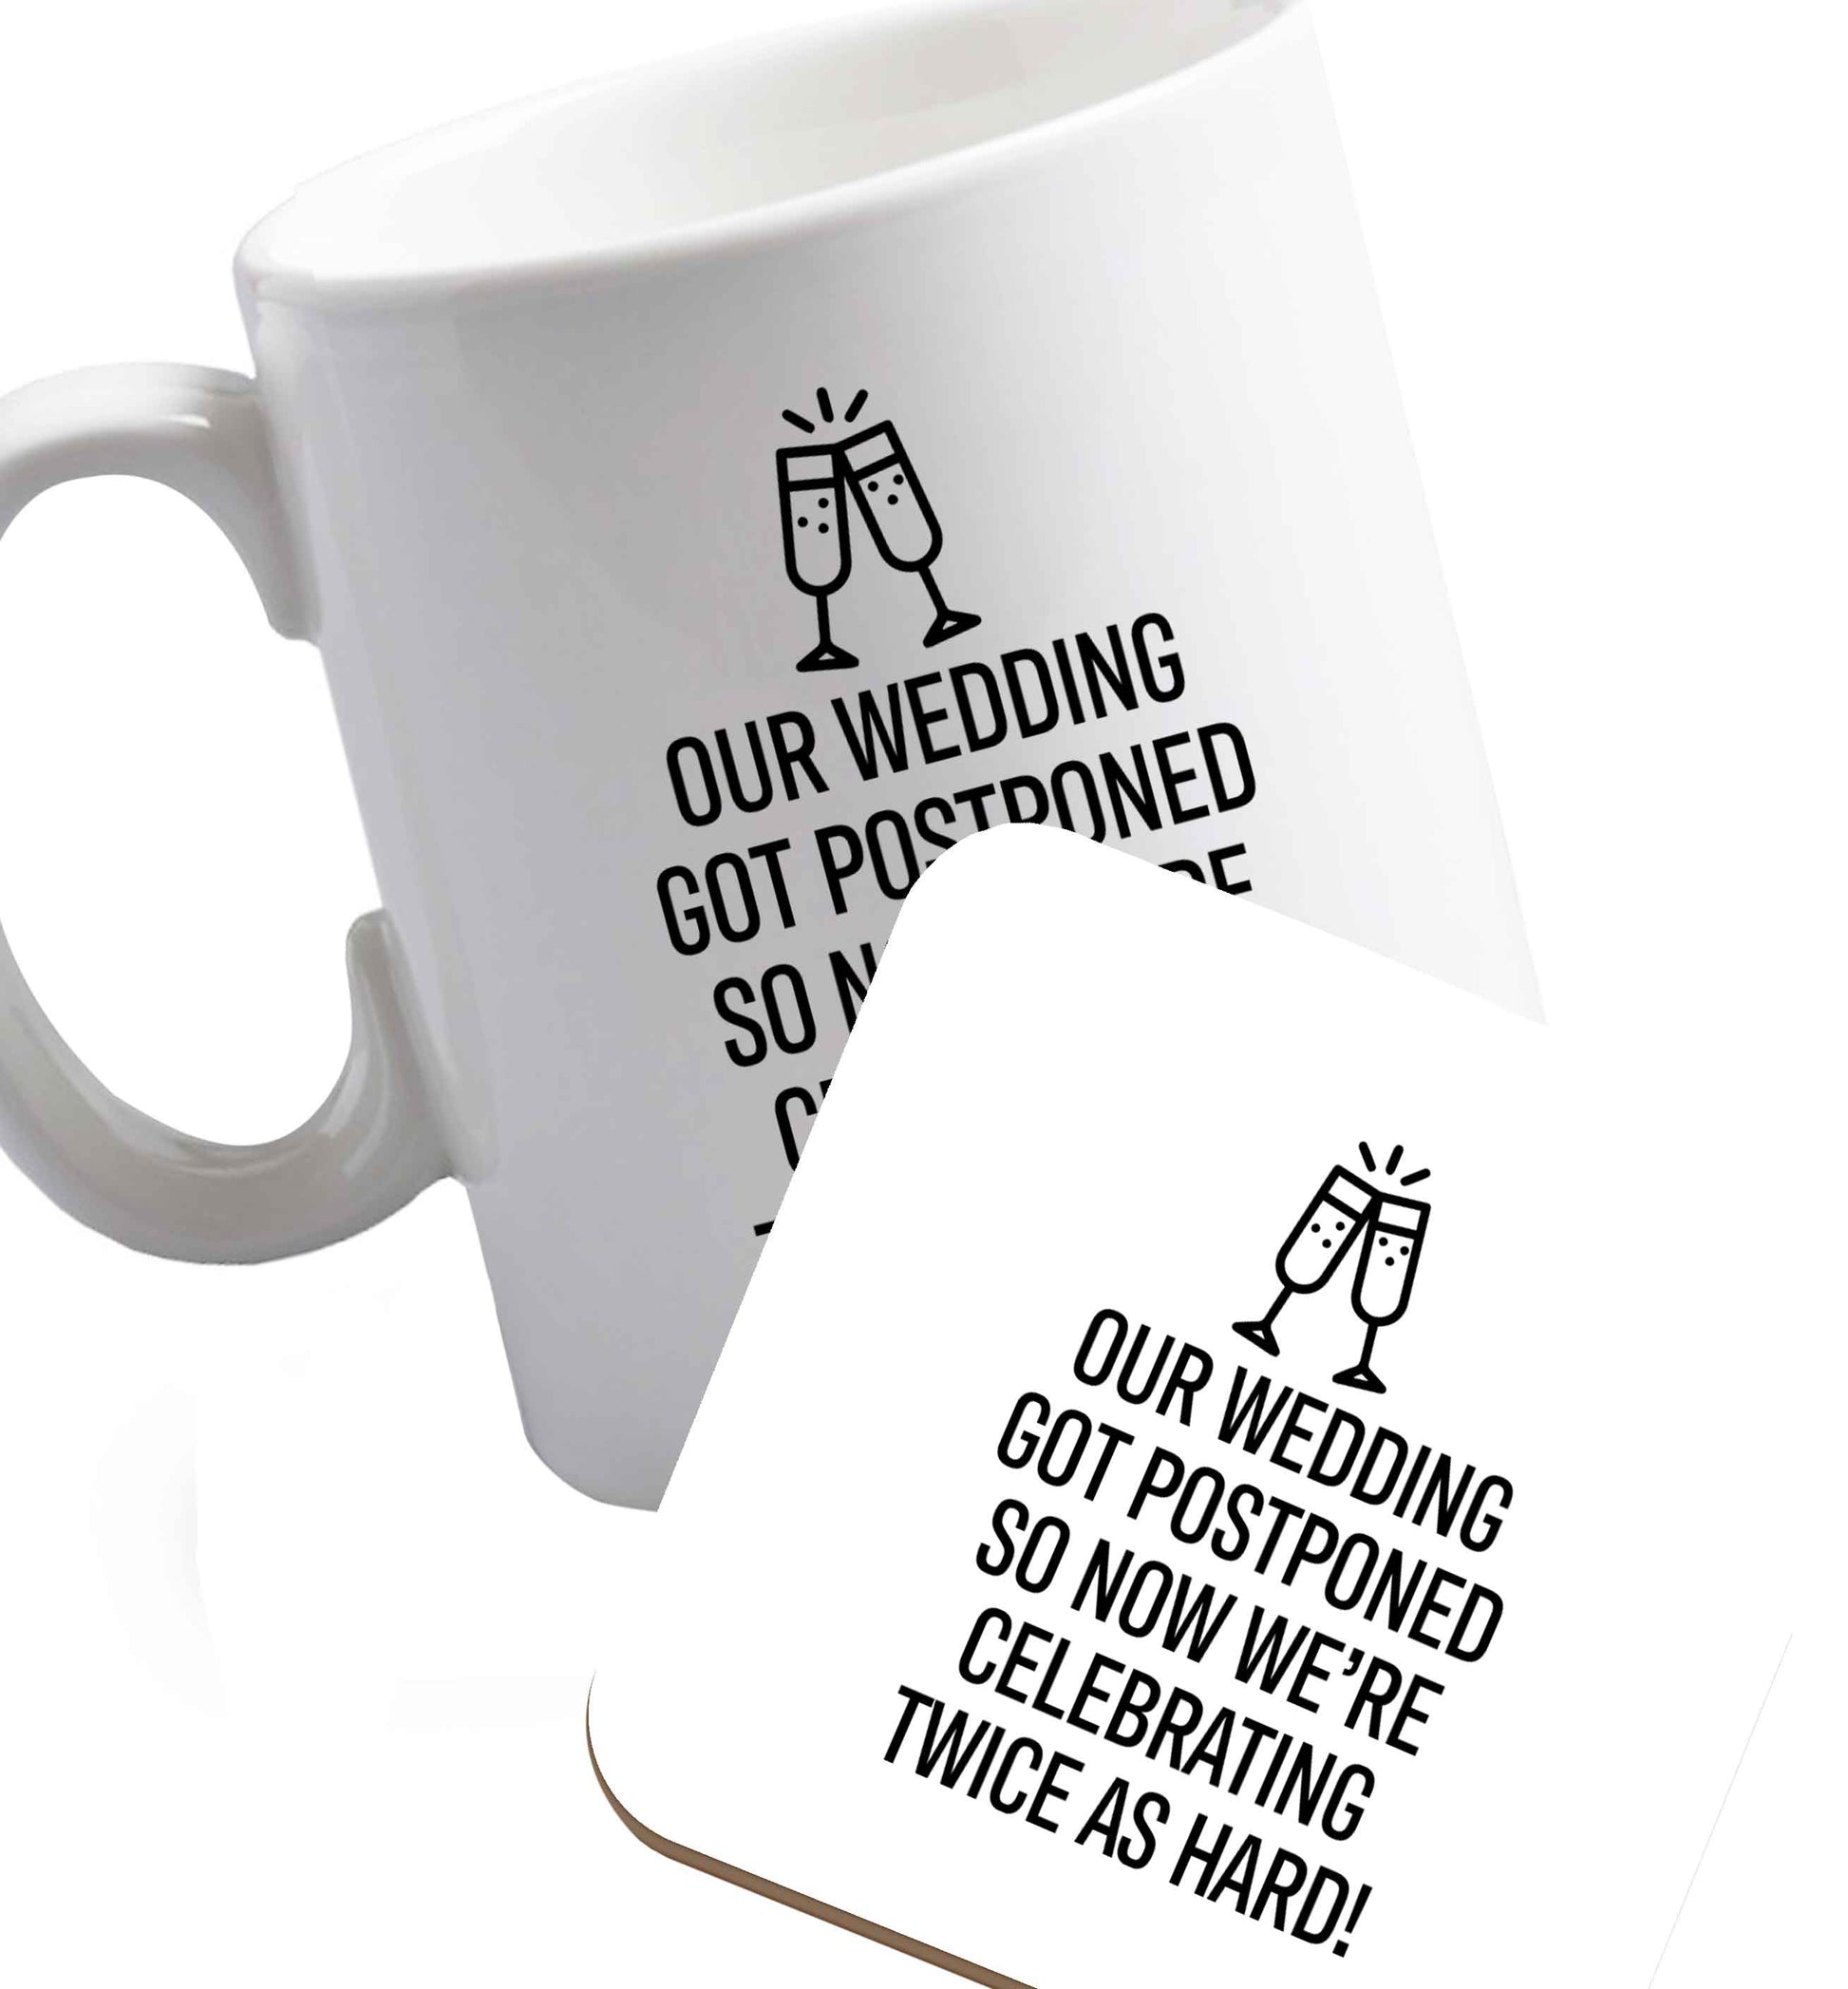 10 oz Postponed wedding? Sounds like an excuse to party twice as hard!    ceramic mug and coaster set right handed